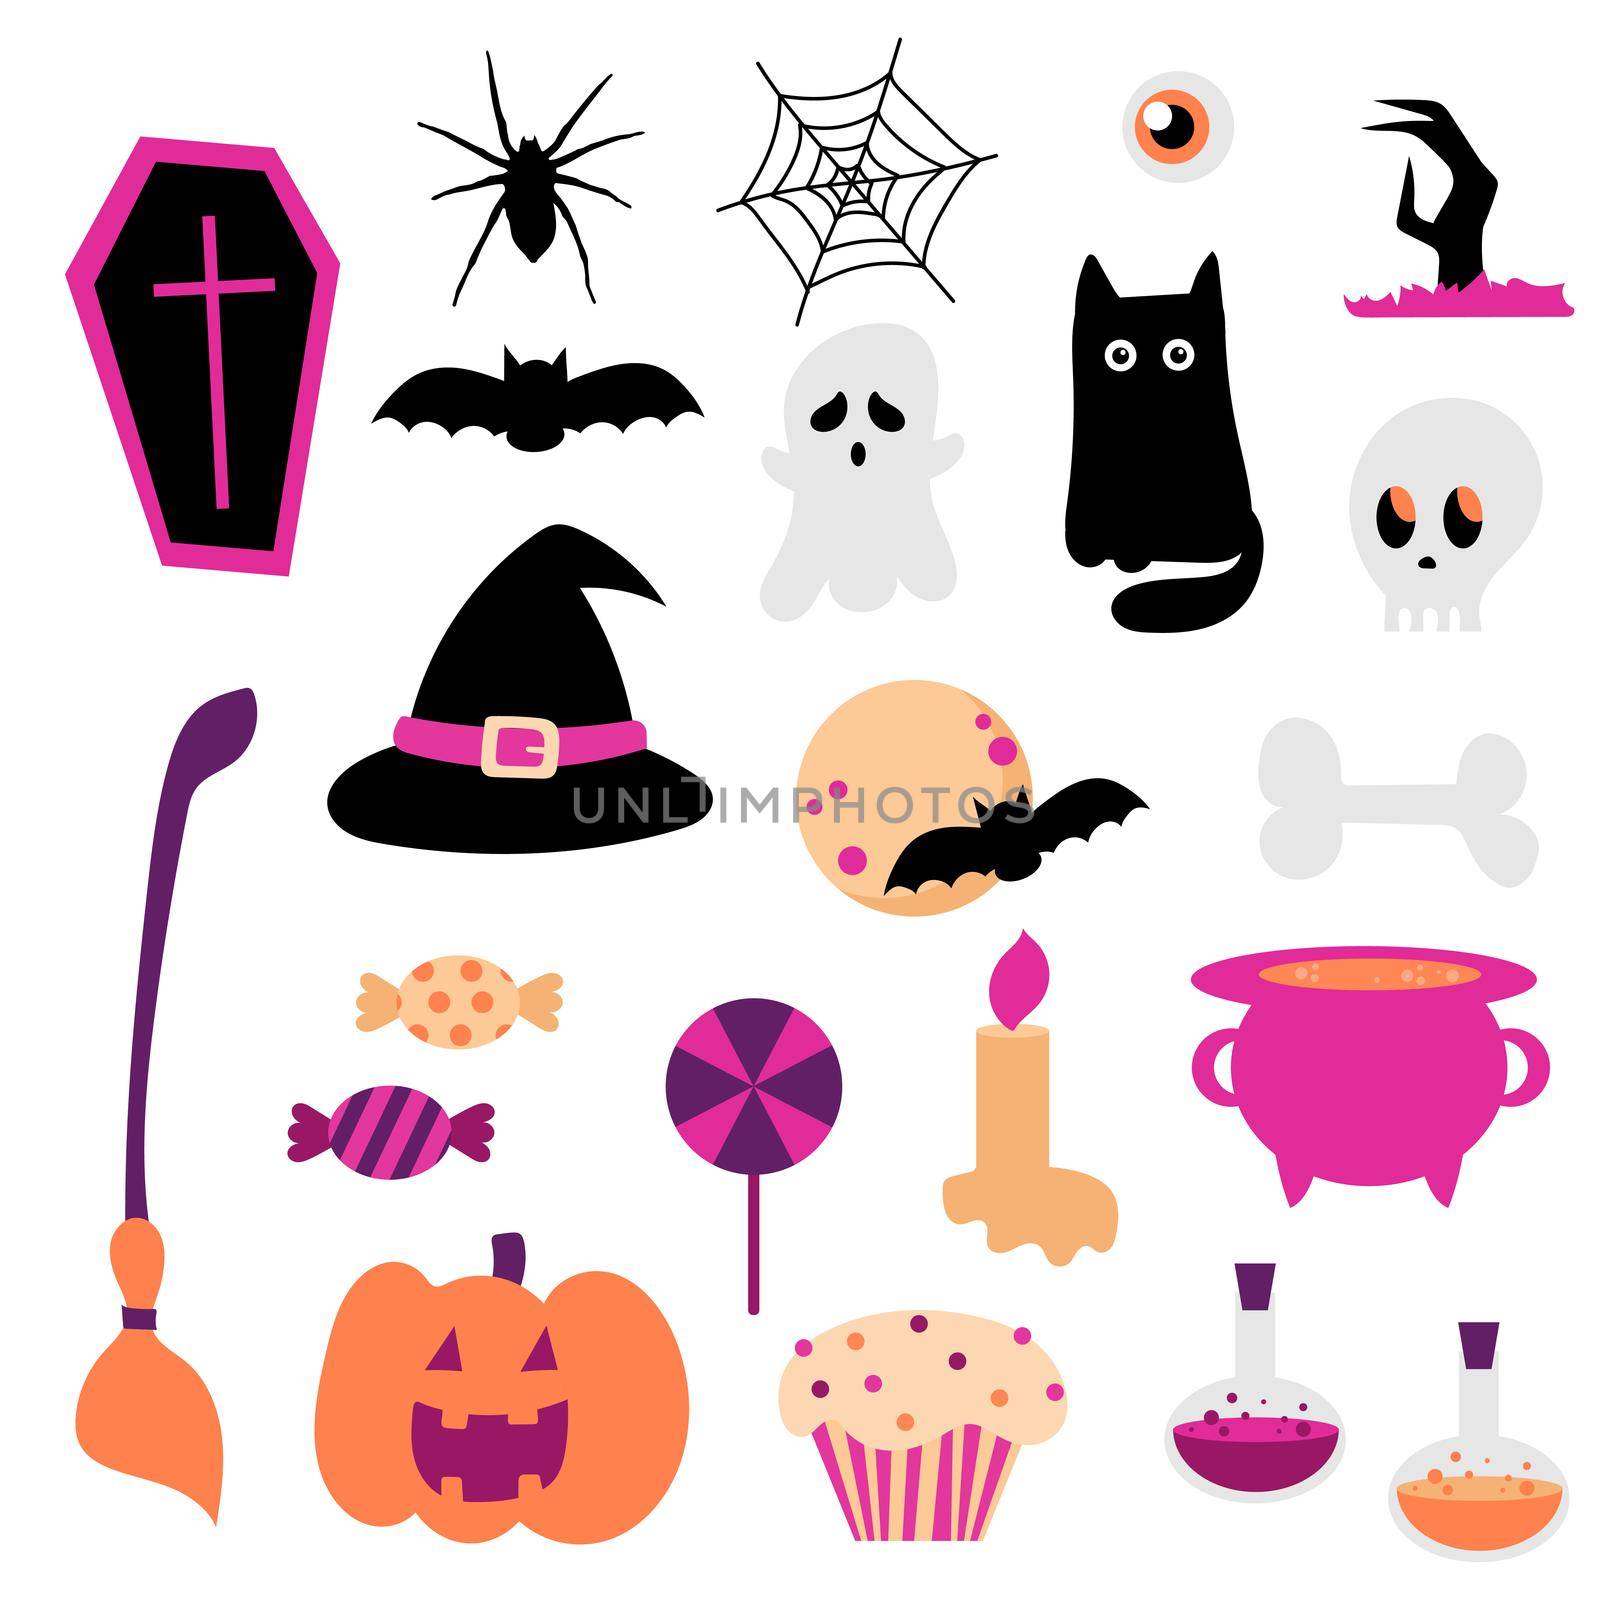 New big set of elements for Halloween. Cartoon icons for holiday by natali_brill